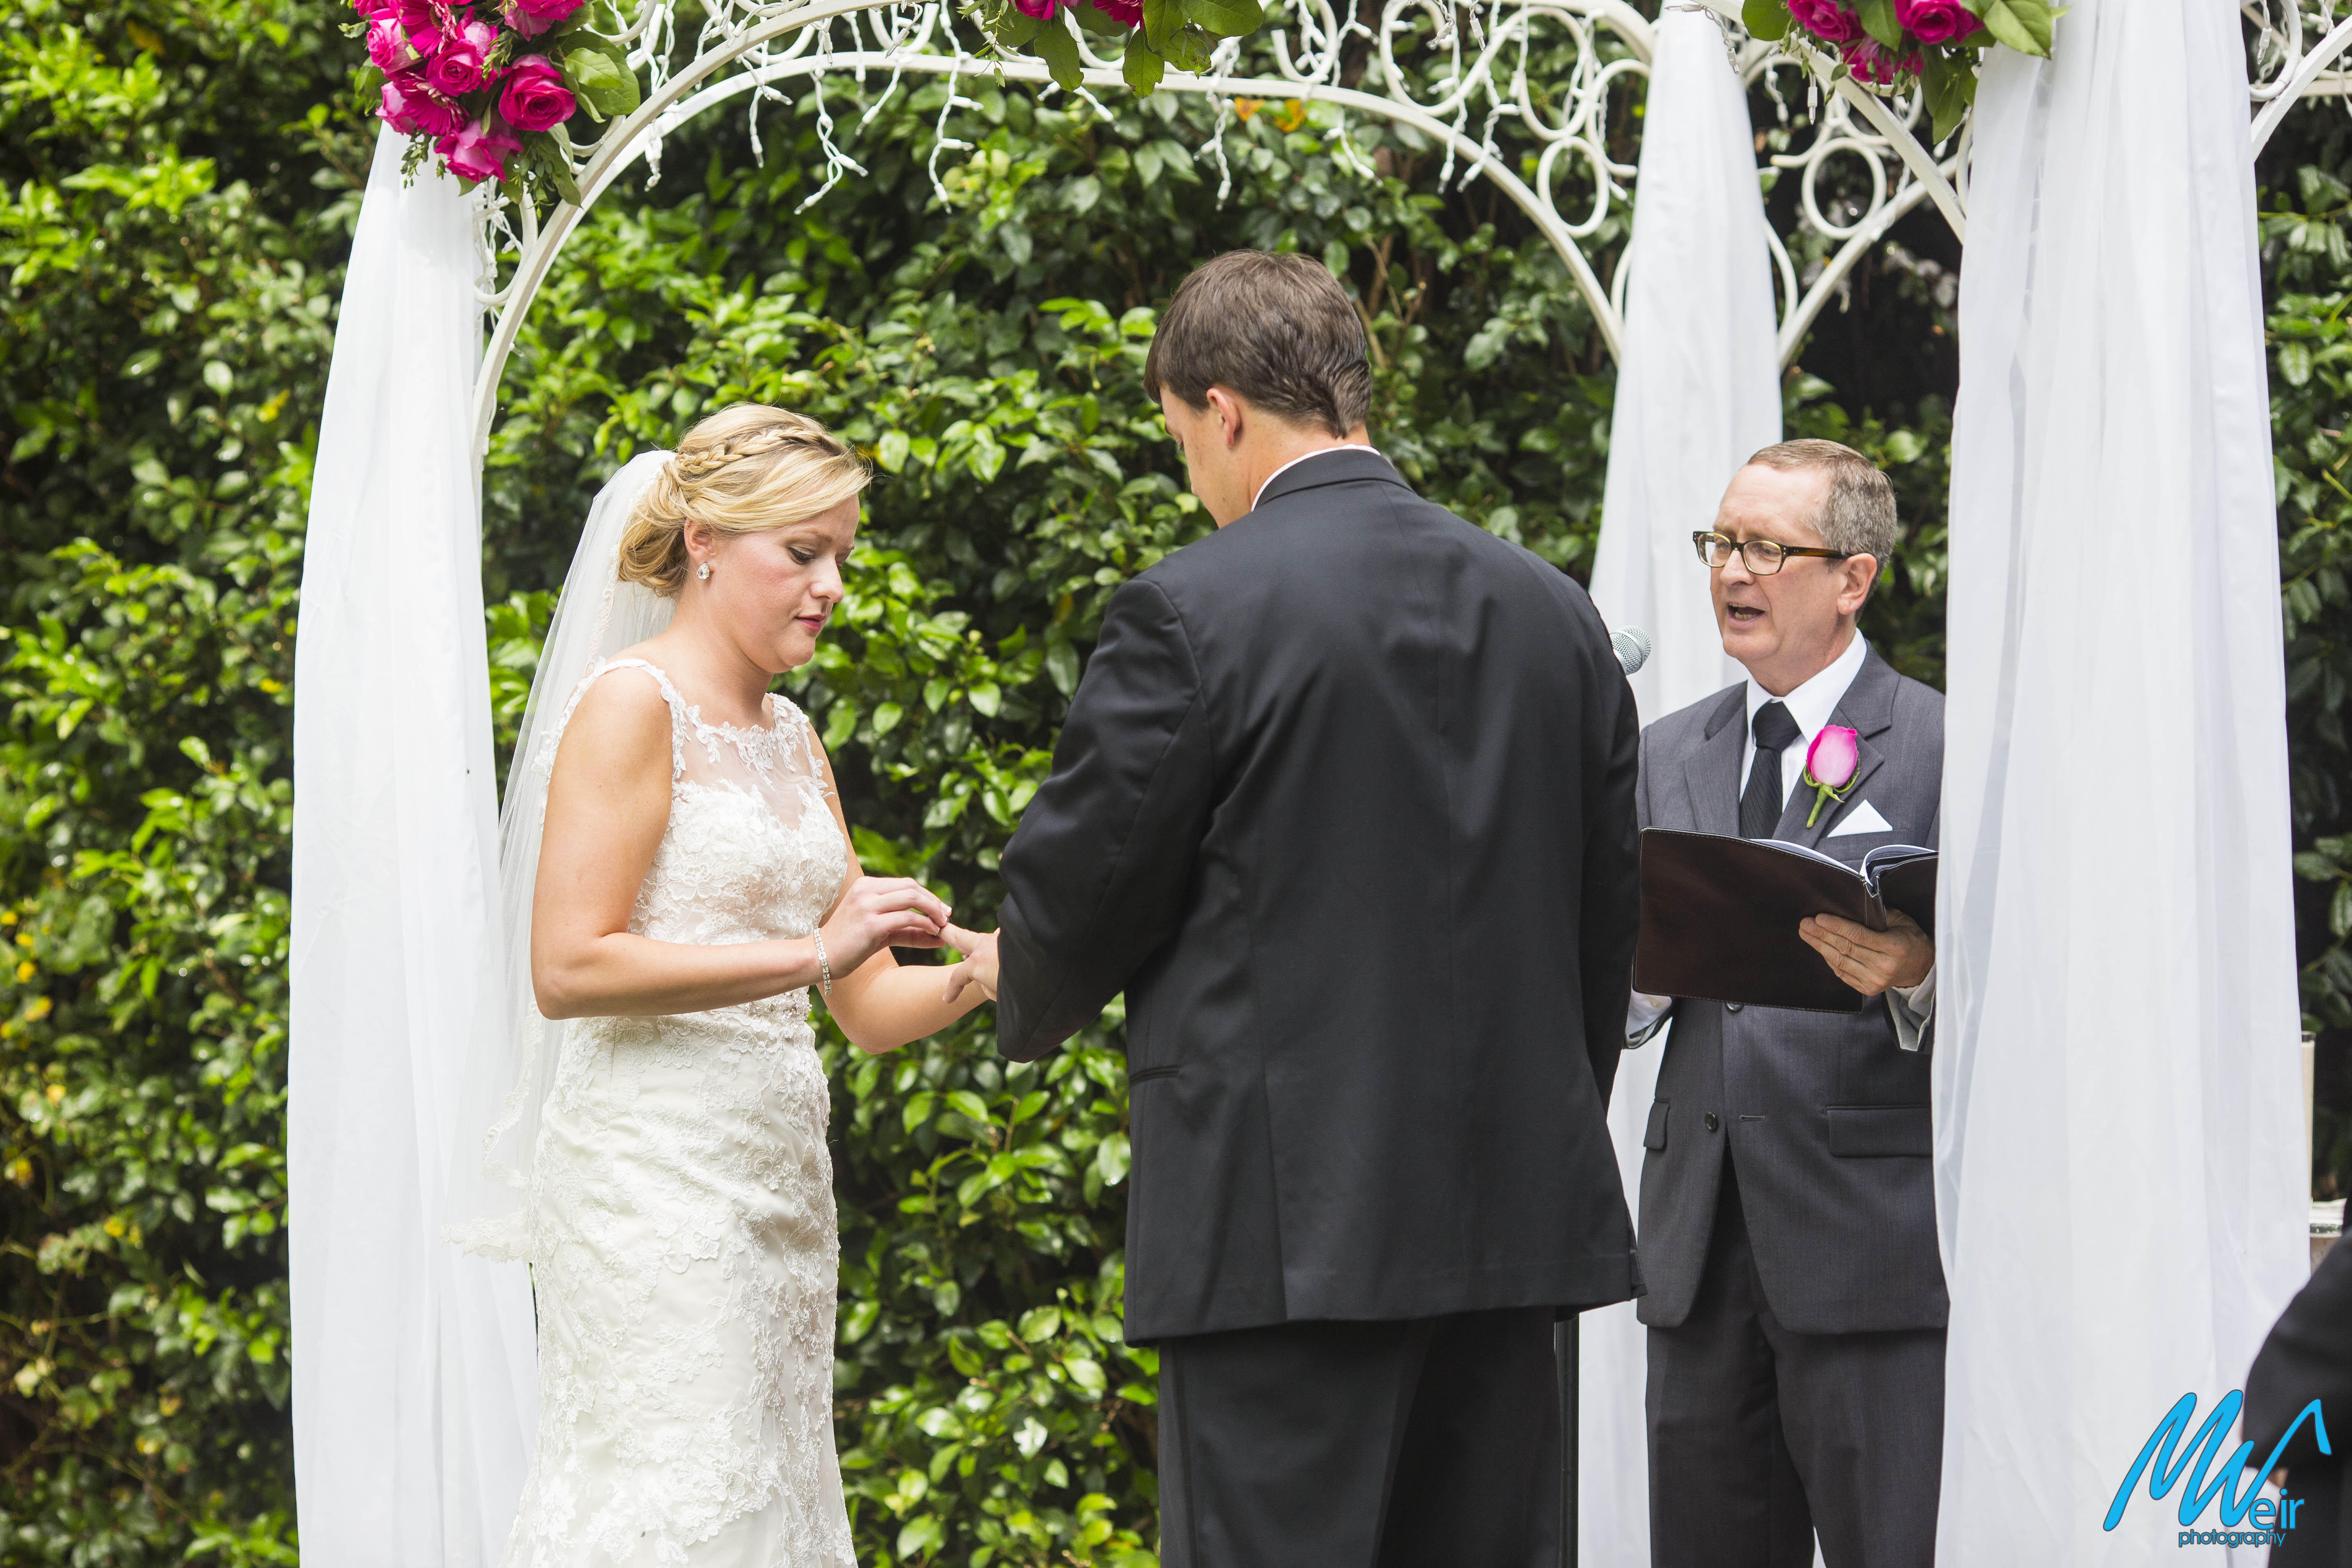 bride putting ring on grooms finger during wedding ceremony